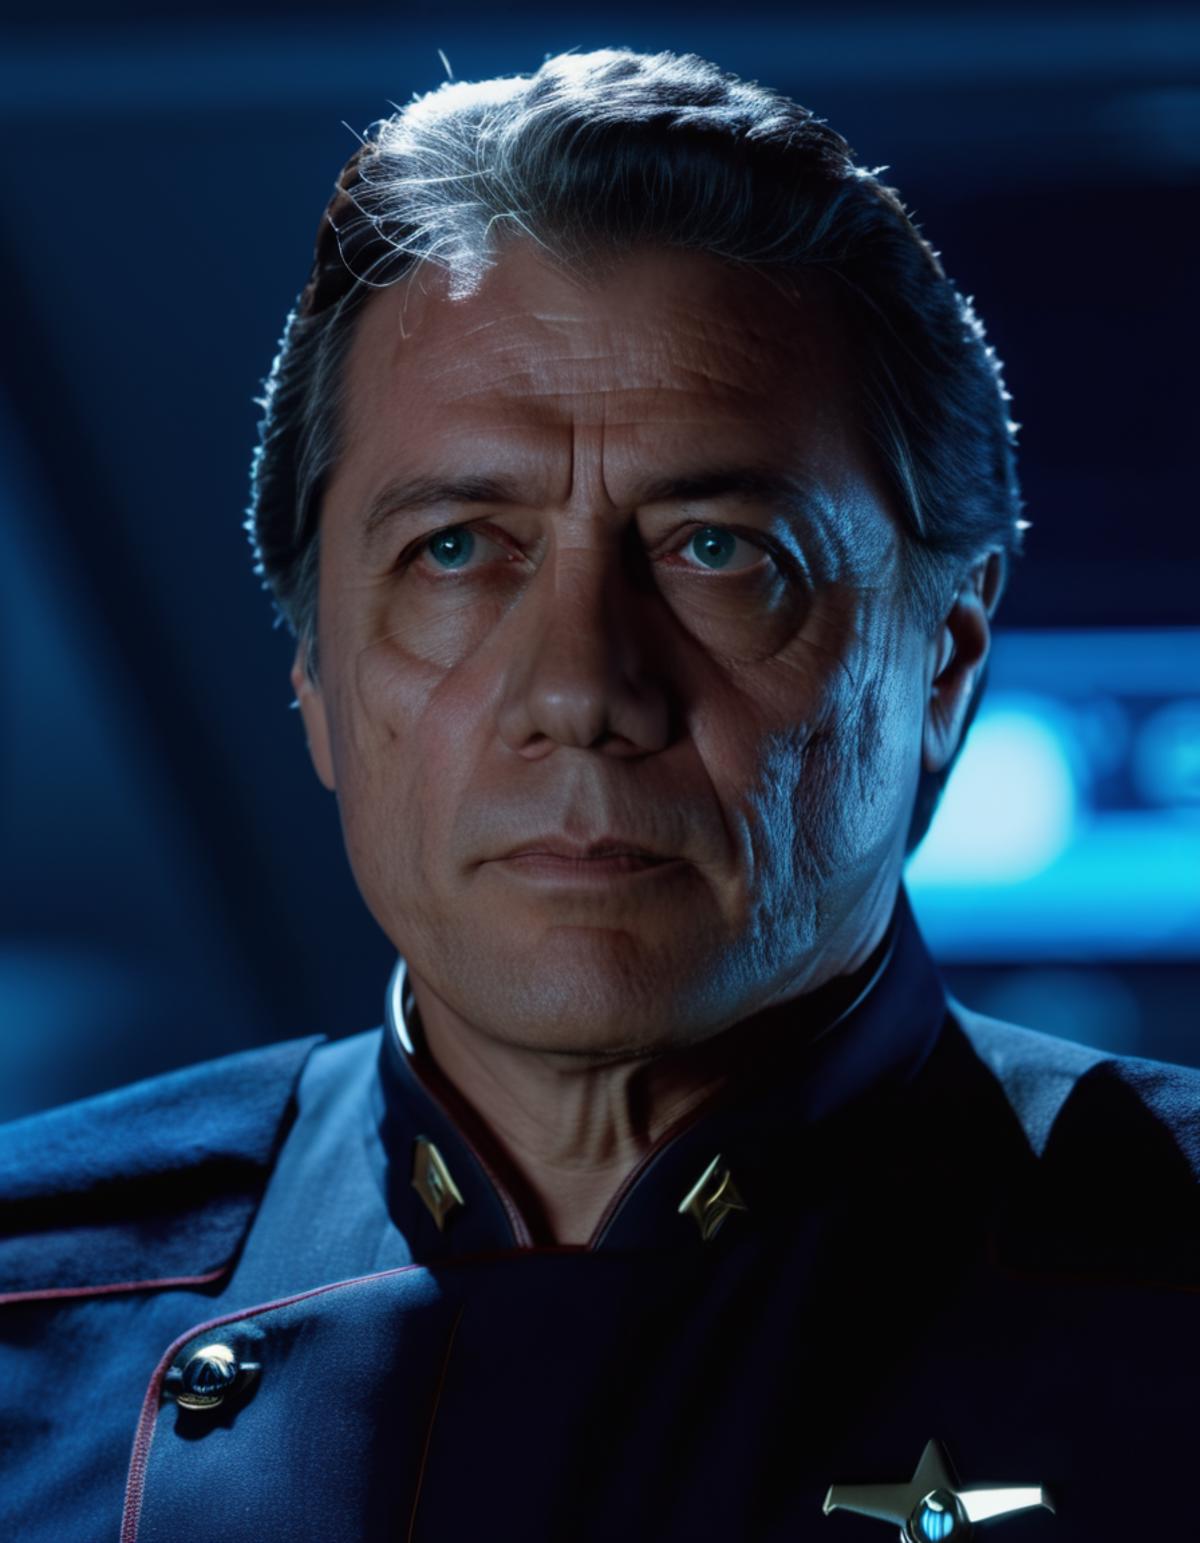 William Adama (SDXL) image by WillTheConker